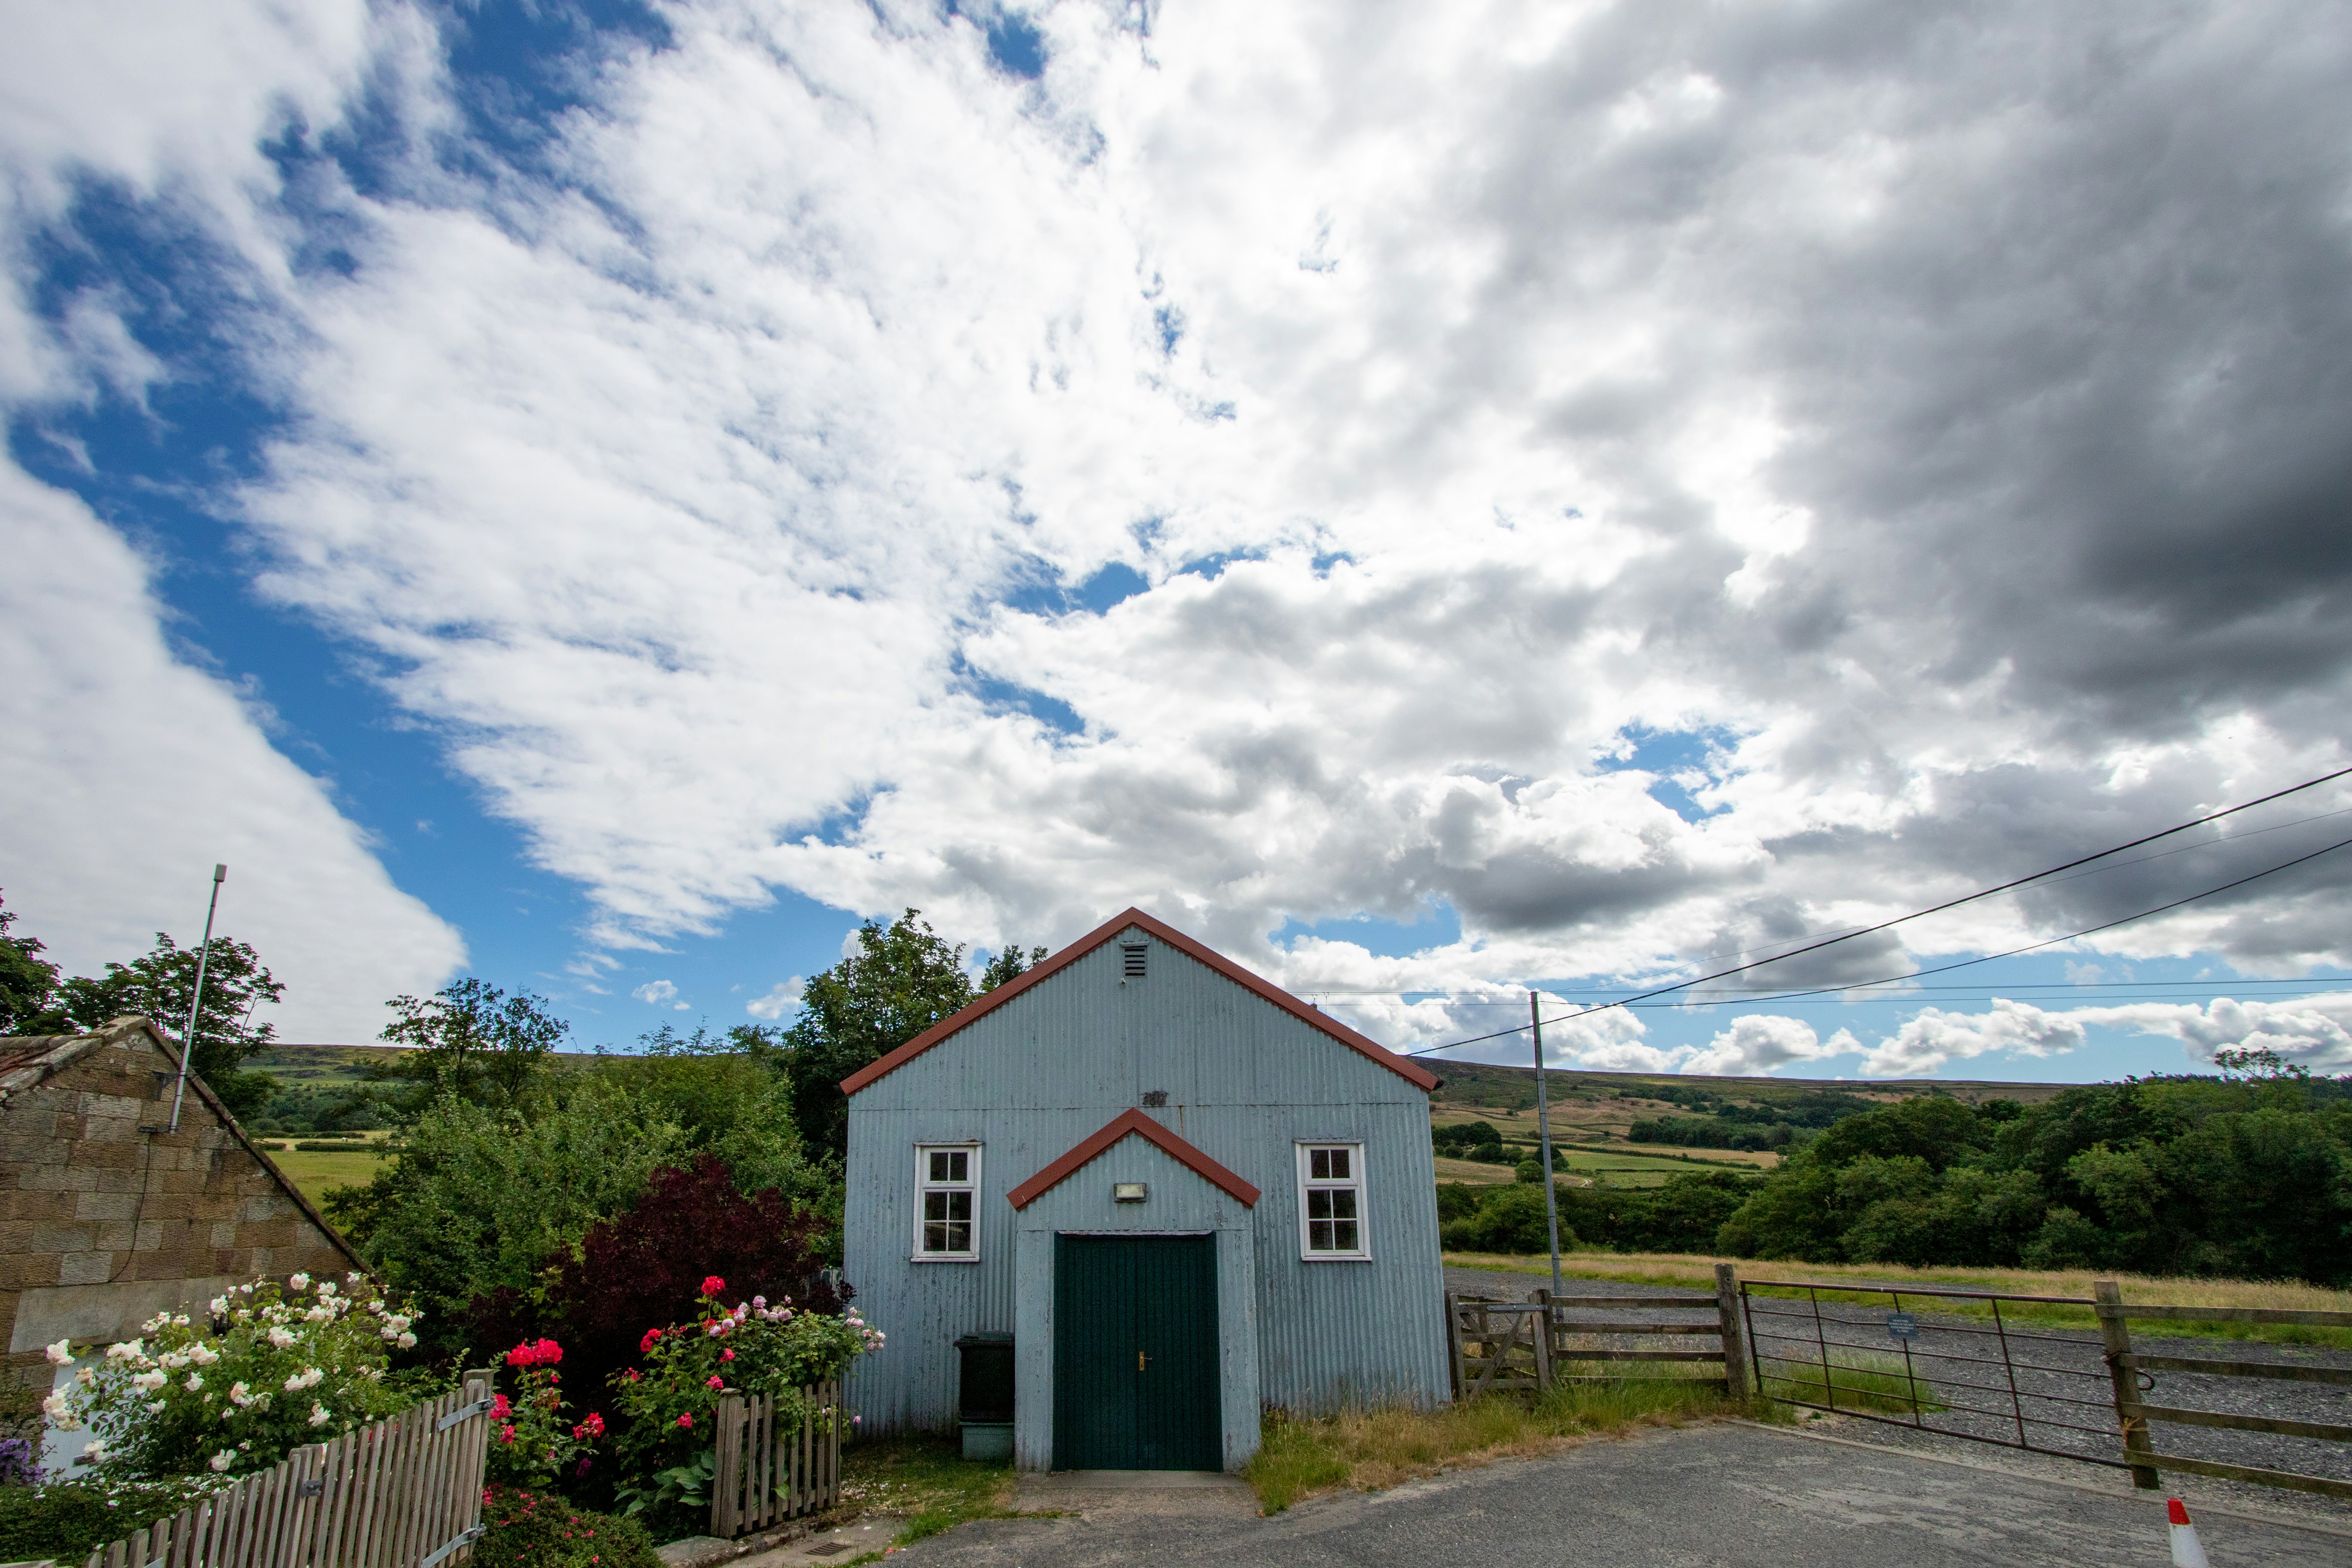 Image of The Band Room, a simple shed on a country road surrounded by the North York Moors.